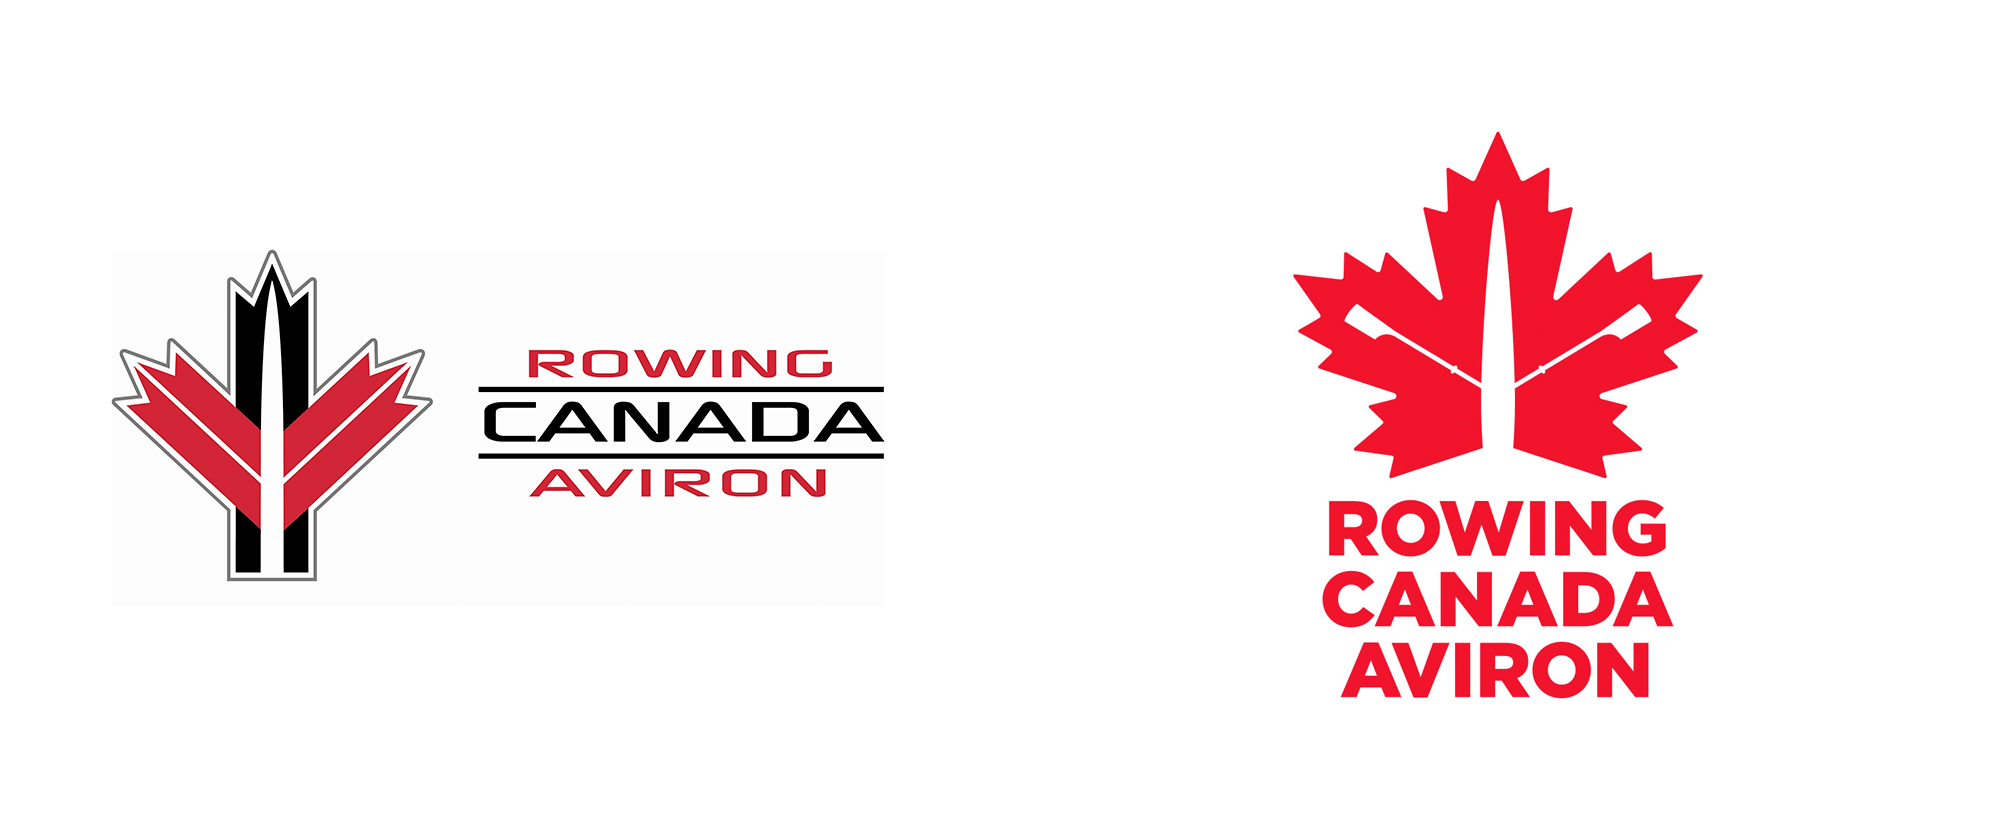 Red Leaf Logo - Brand New: New Logo for Rowing Canada Aviron by They